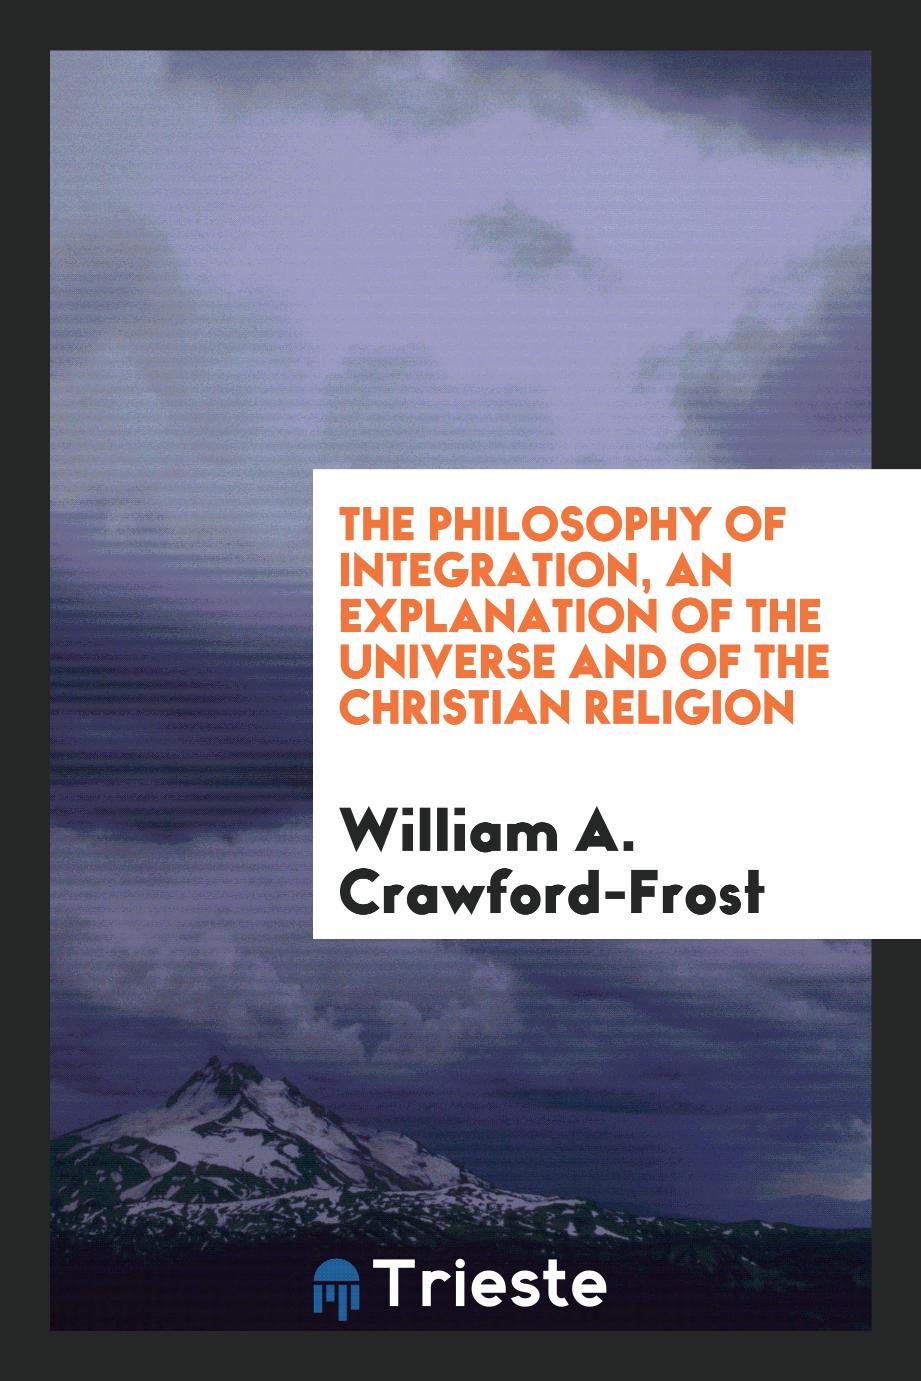 The philosophy of integration, an explanation of the universe and of the Christian religion